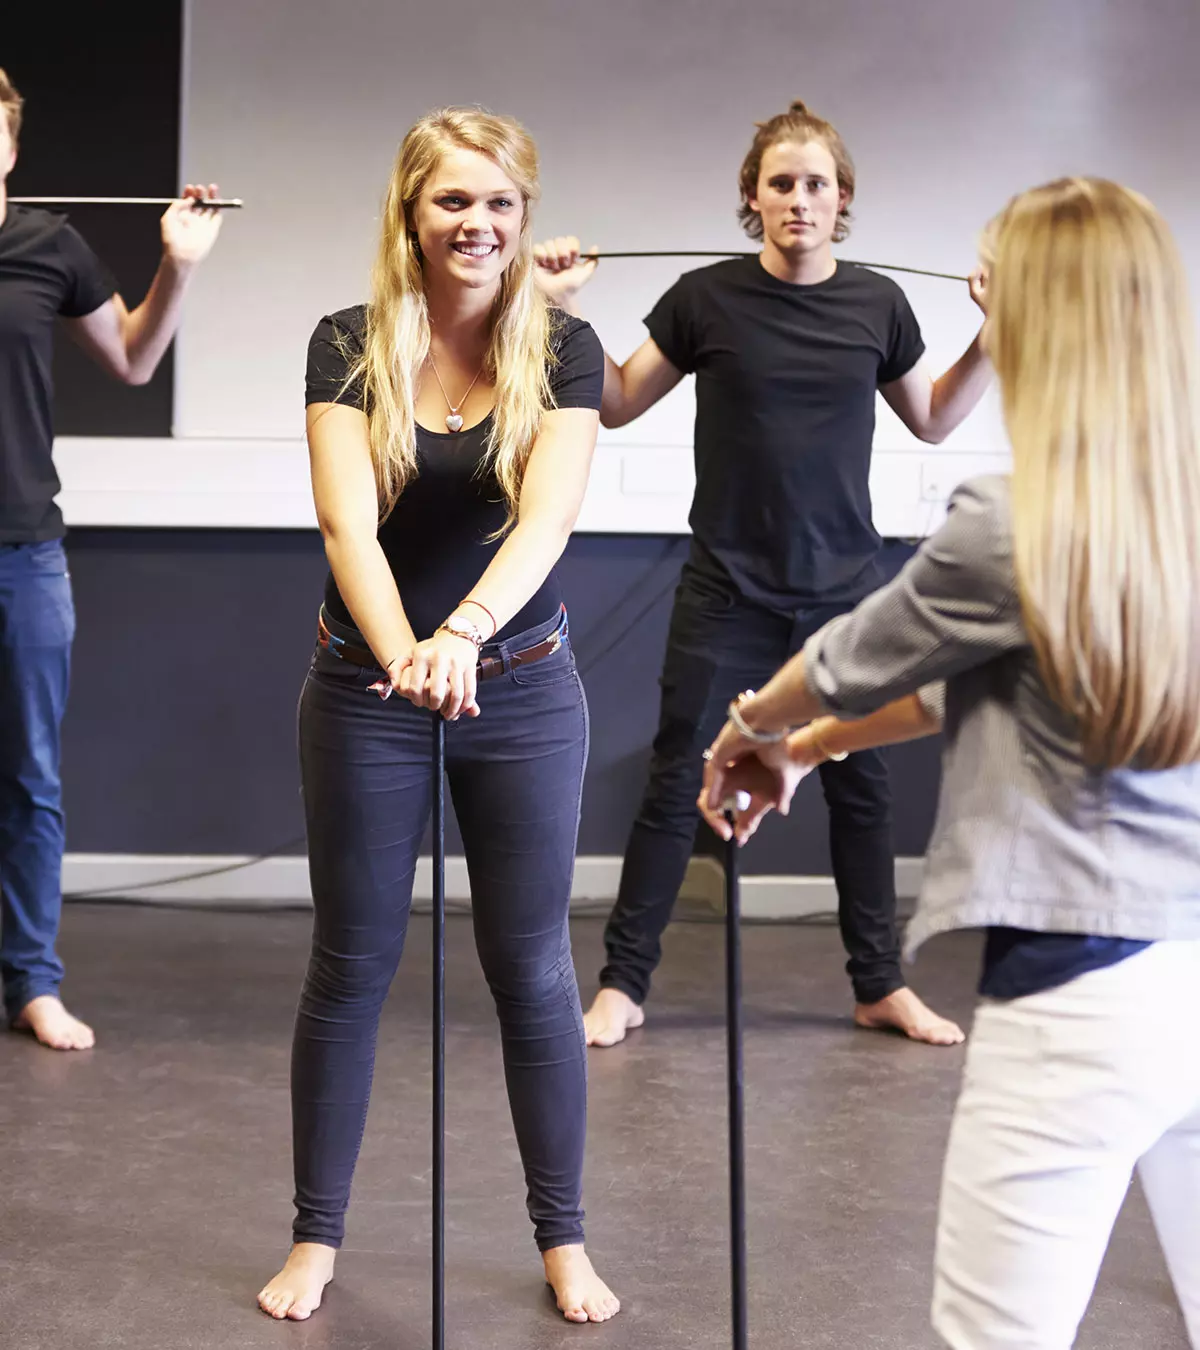 16 Engrossing Drama And Improv Games For Teens